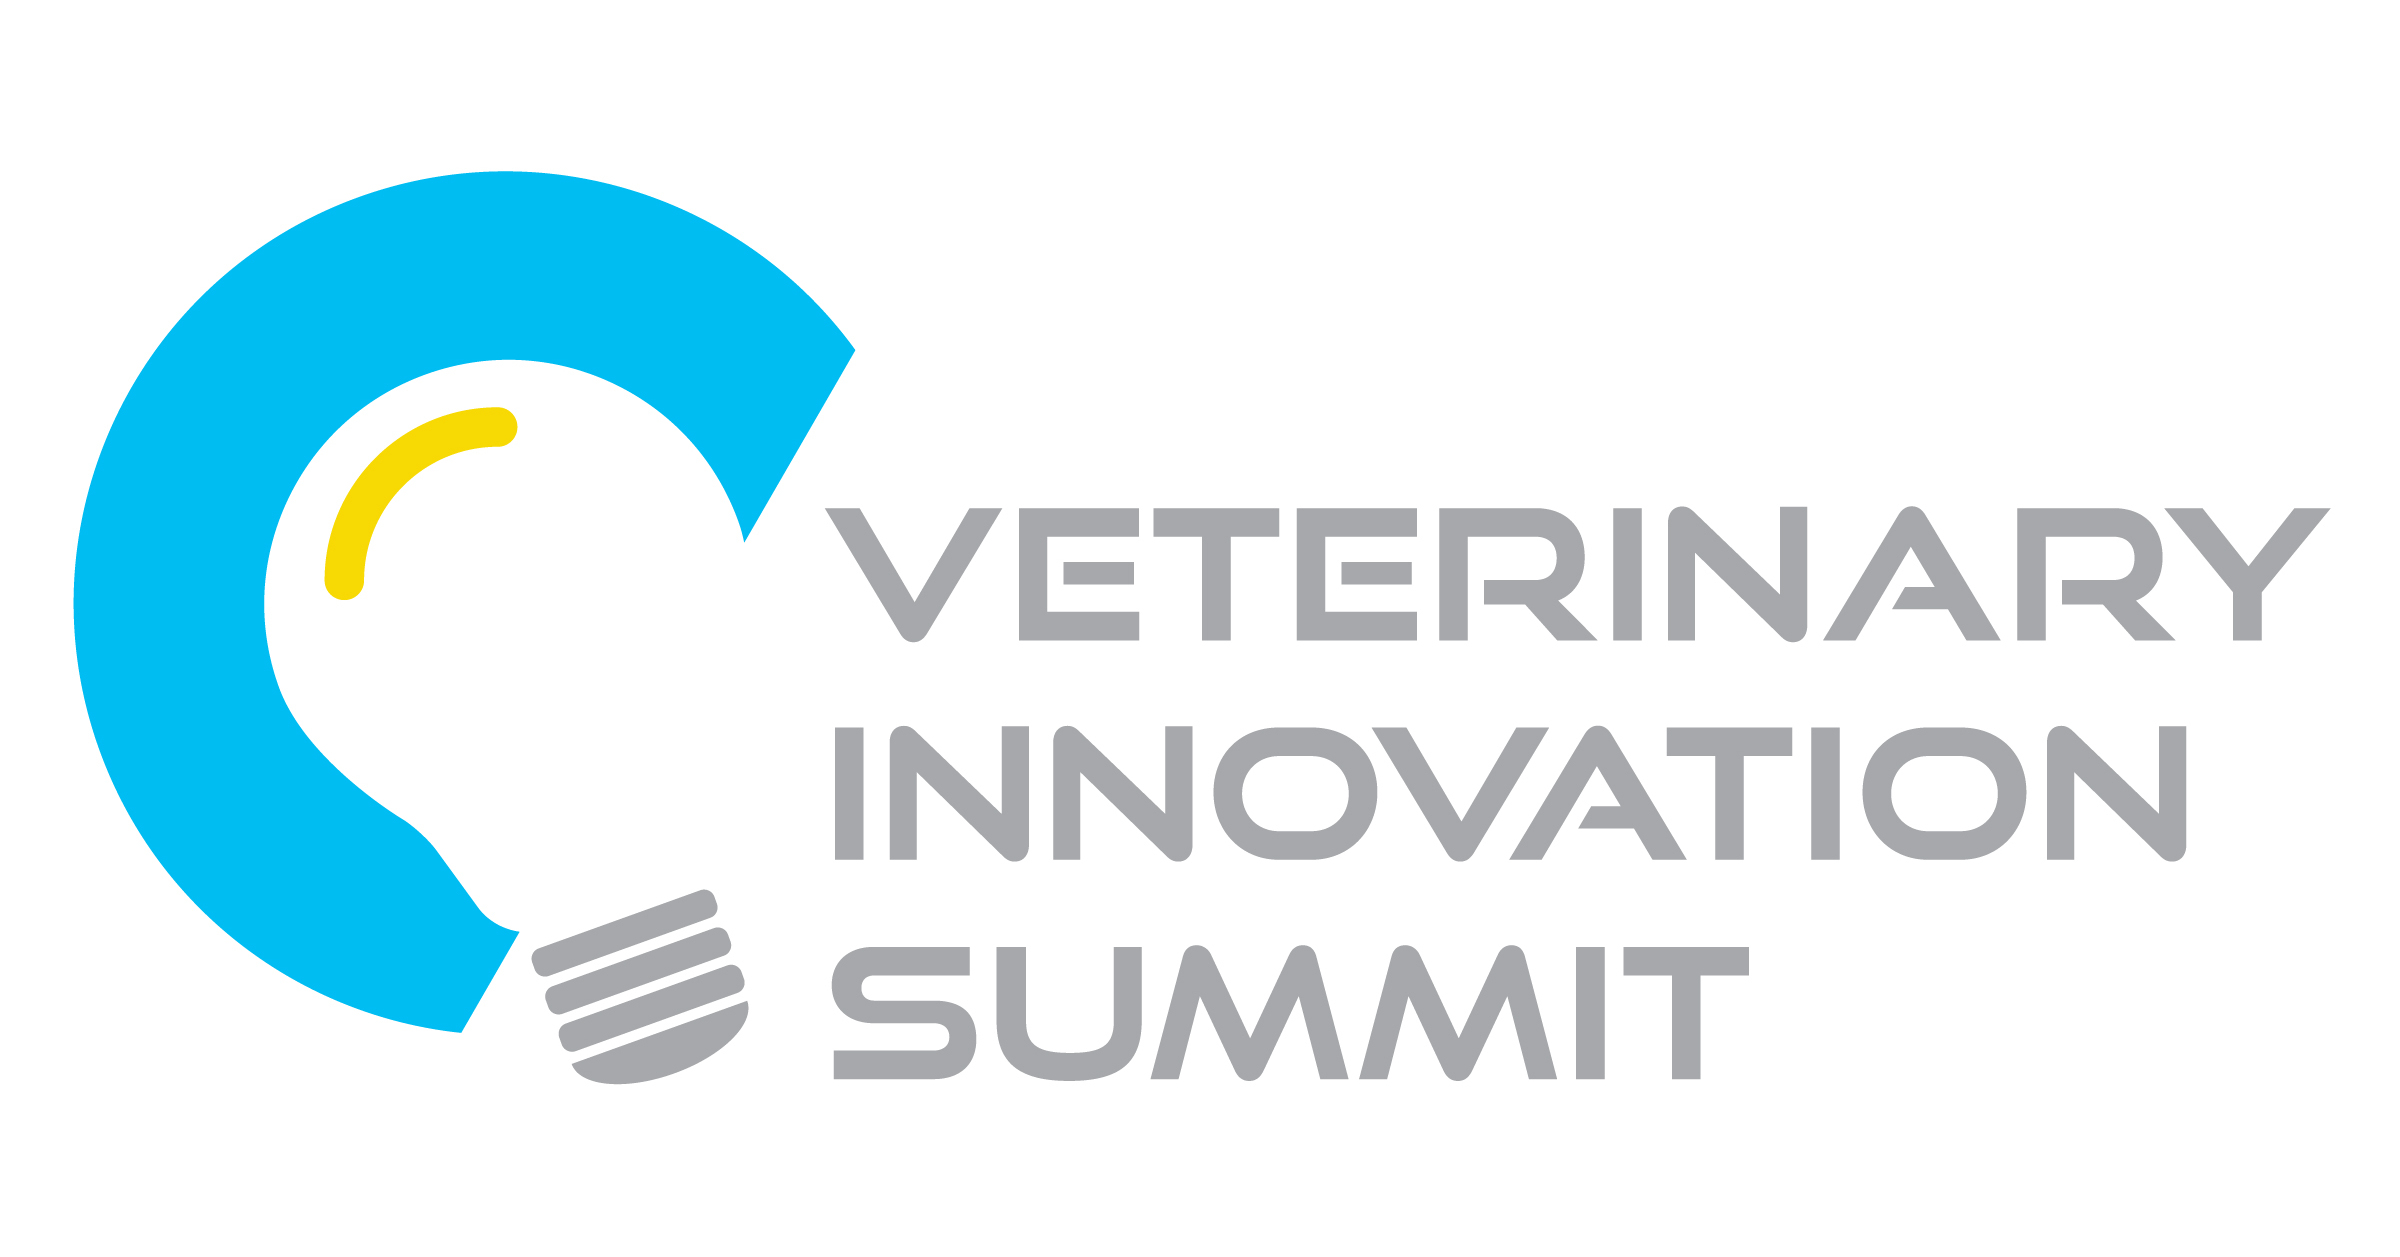 INCREASING ACCESS TO VETERINARY CARE TOPS THE AGENDA AT THE 6TH ANNUAL VETERINARY INNOVATION SUMMIT